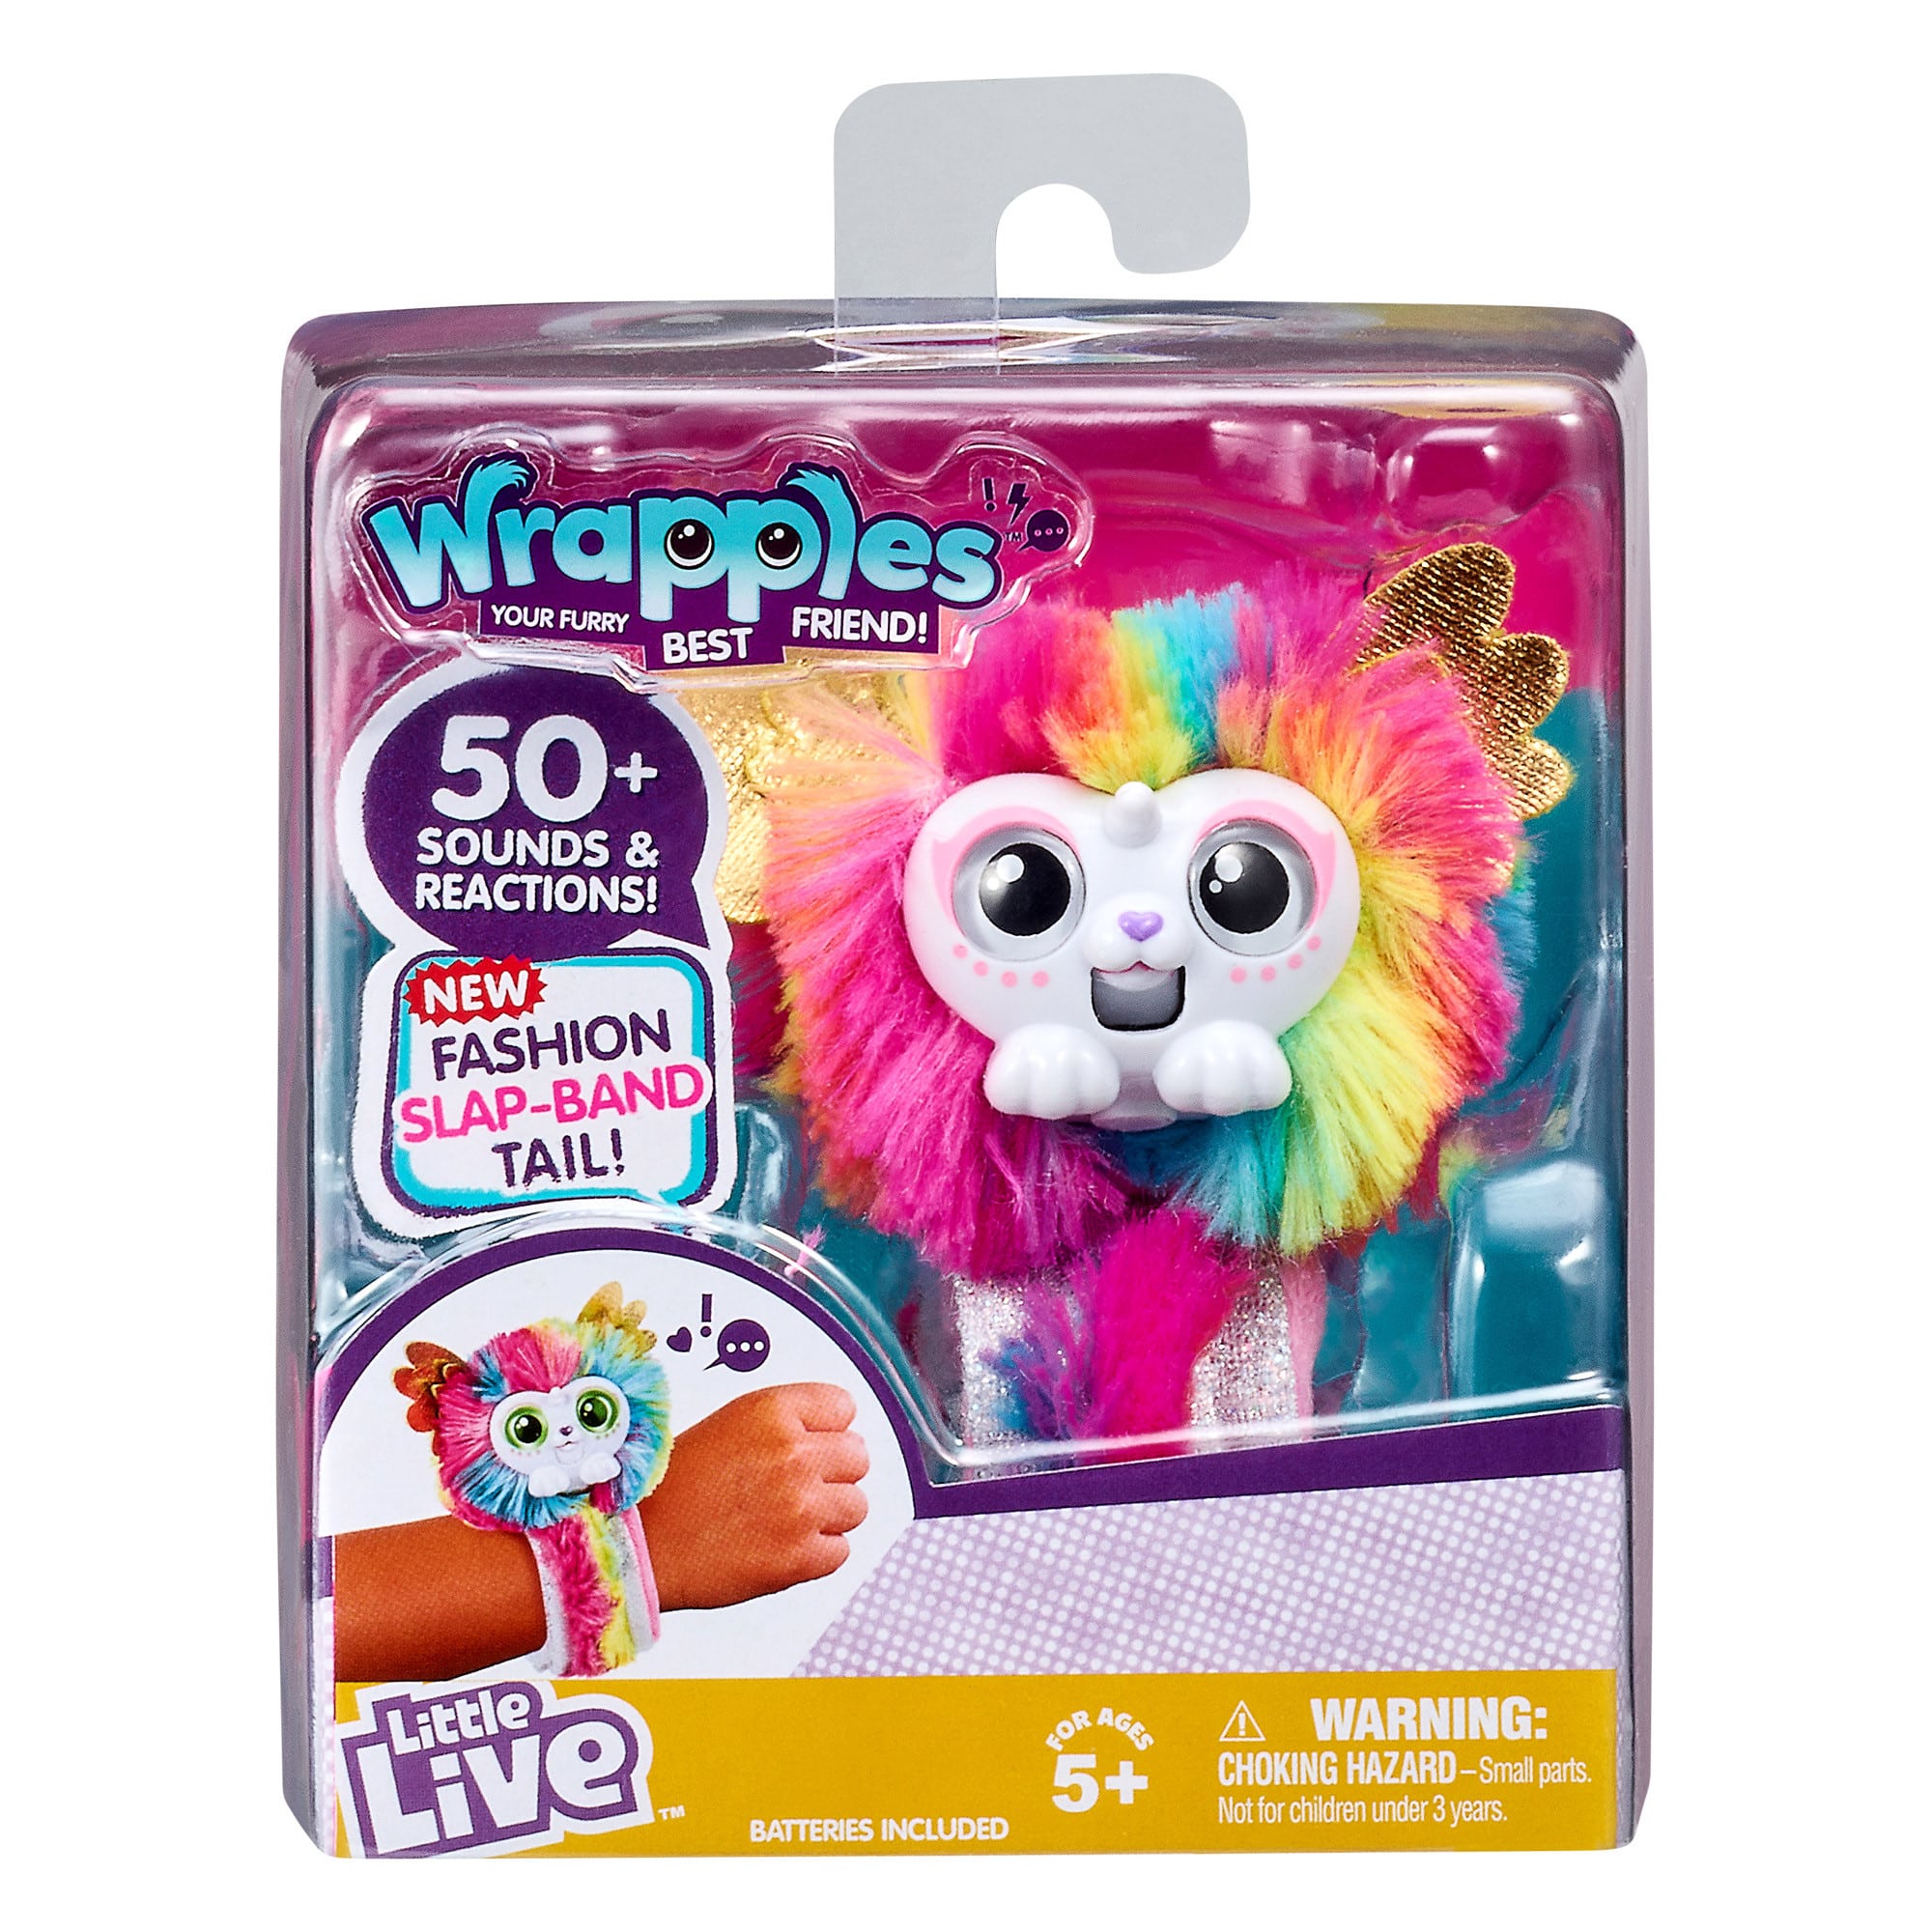 Little Live Pets - Wrapples S3 - Raybo